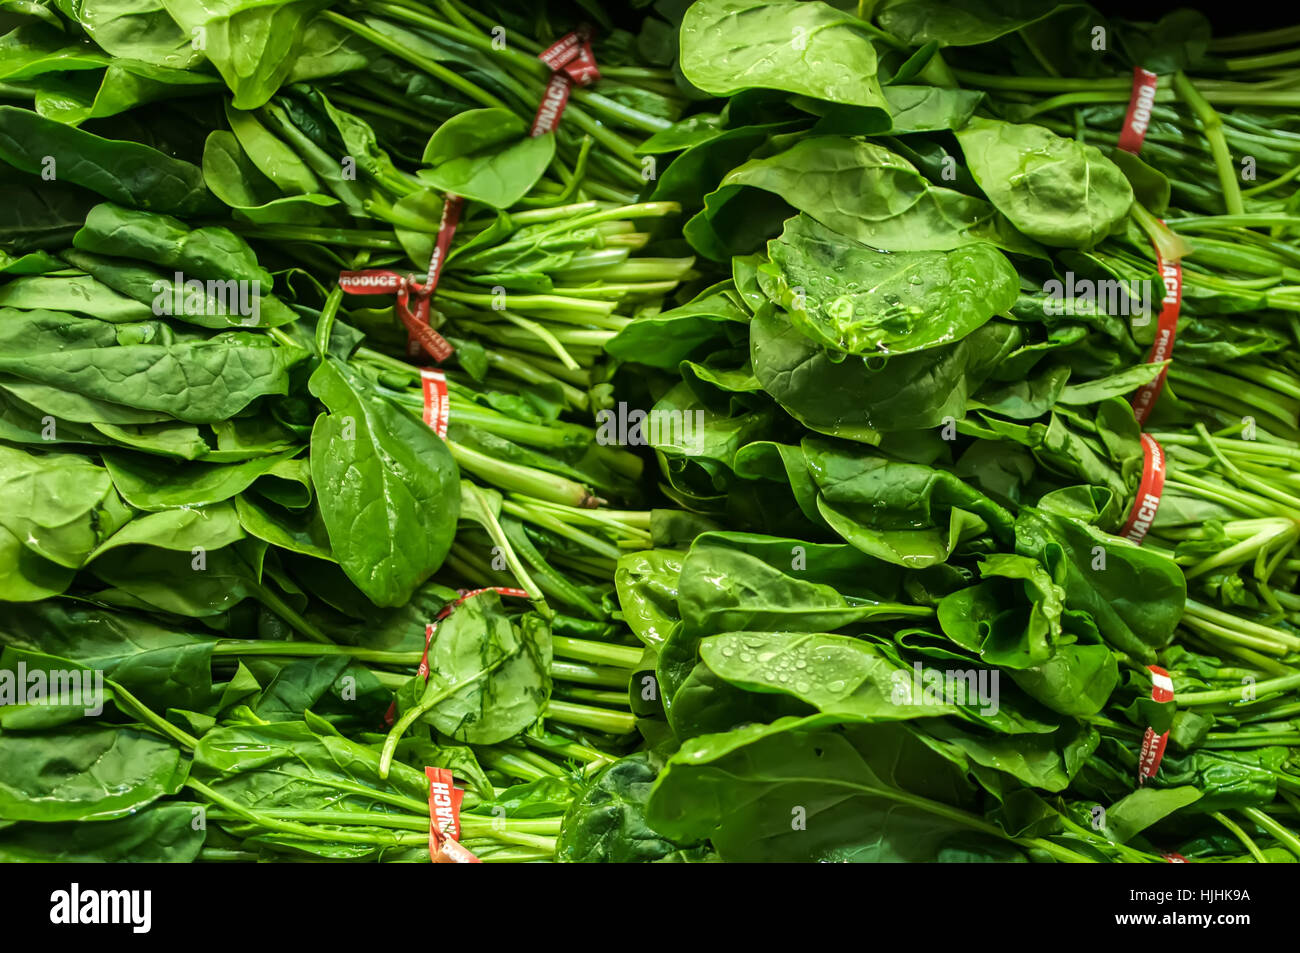 food, aliment, leaf, health, garden, asia, agriculture, farming, kitchen, Stock Photo